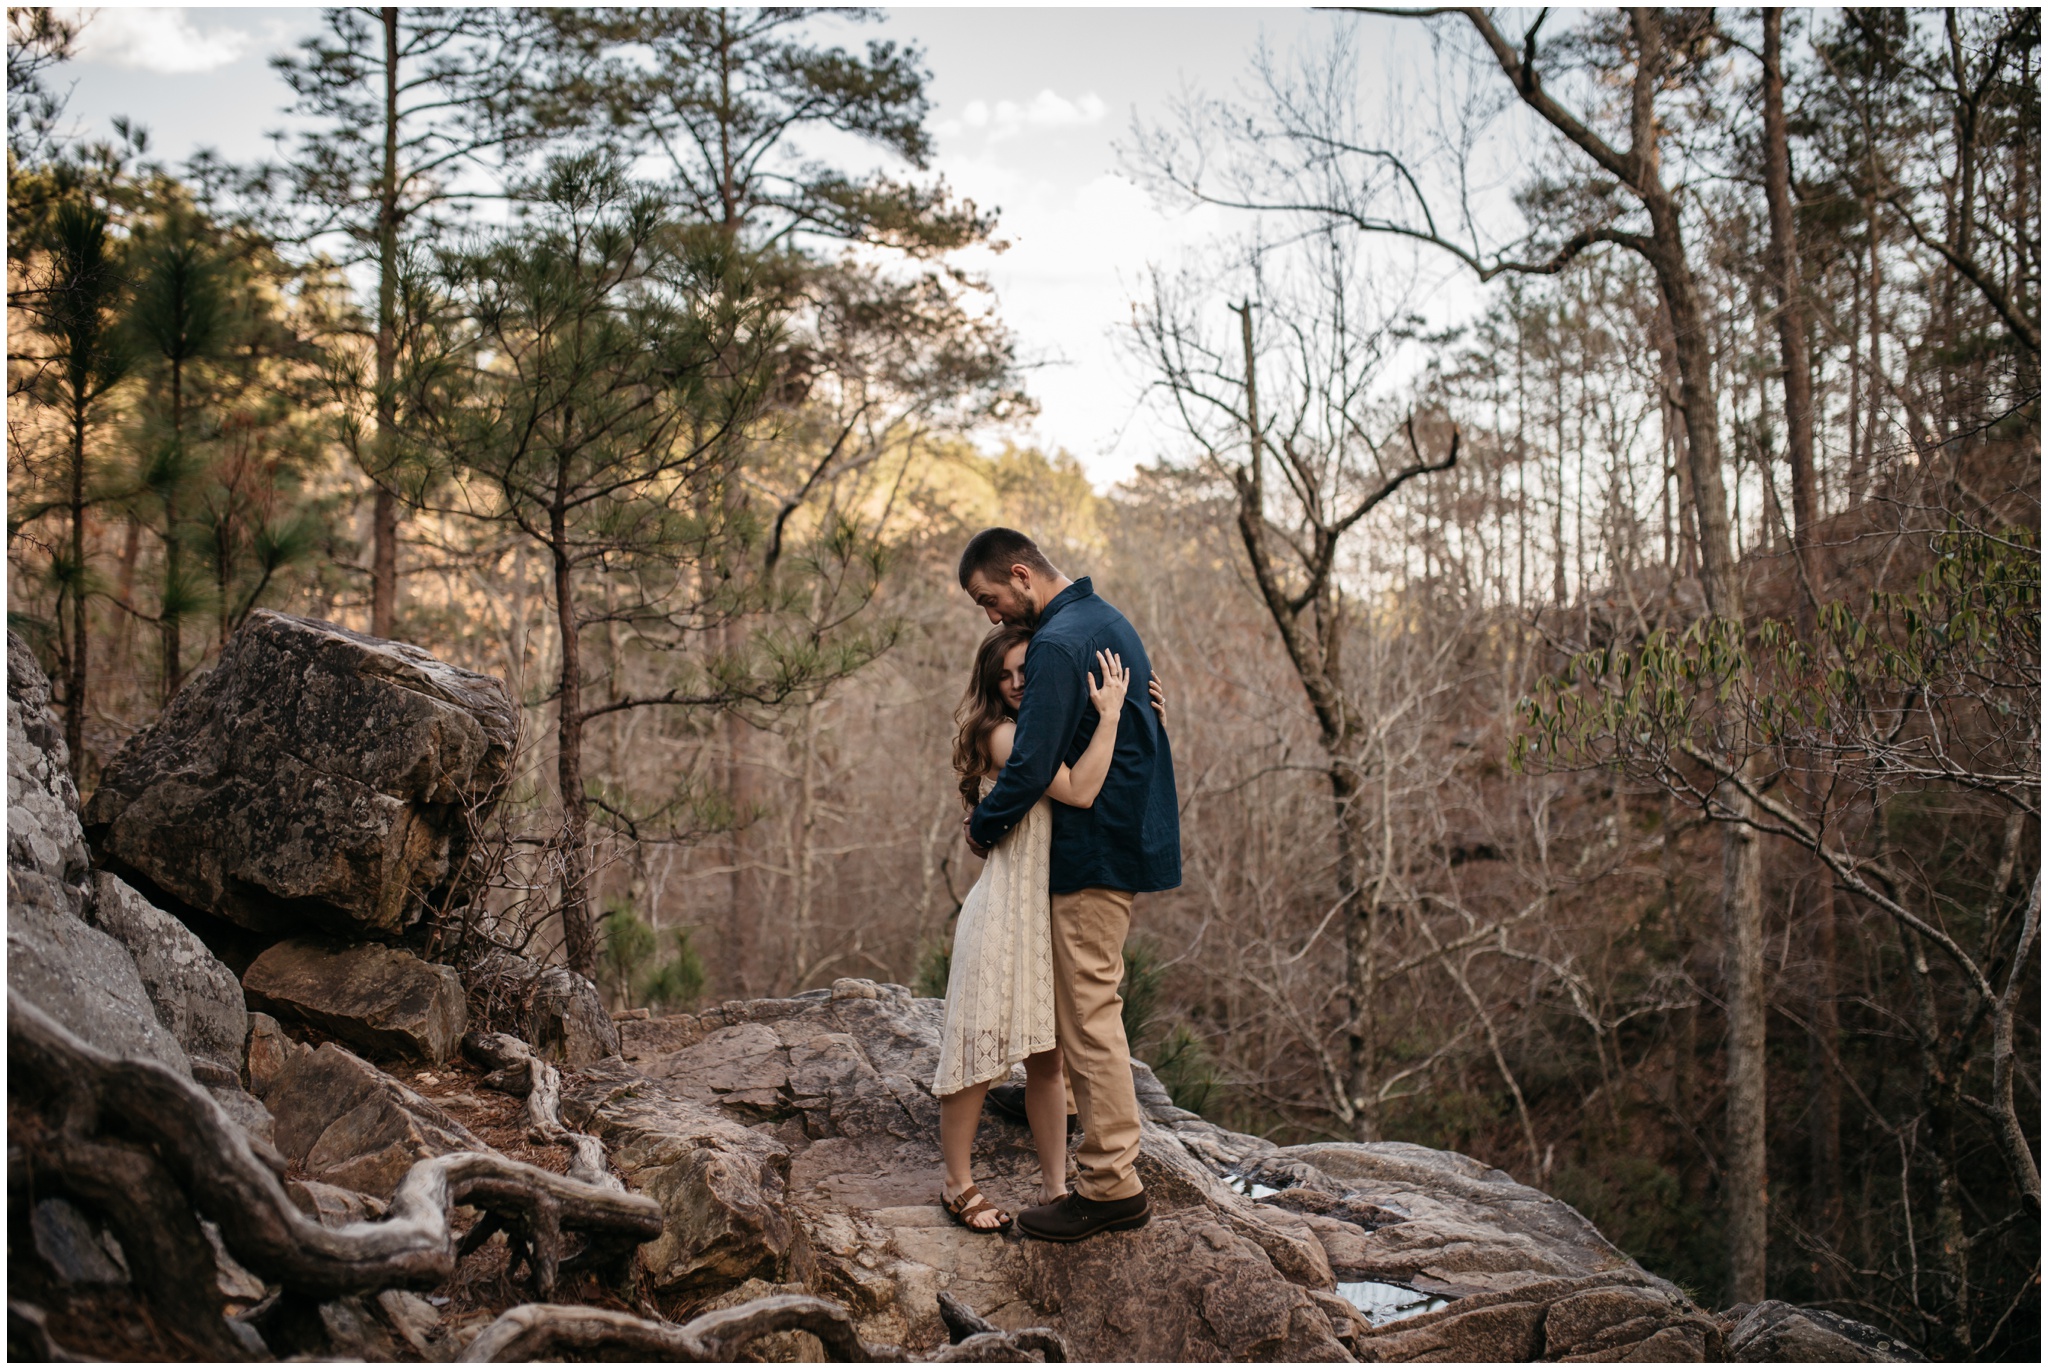 The Morros Photography Maddie and Jake Engagament session at Oak Mountain State Park Alabama_0126.jpg